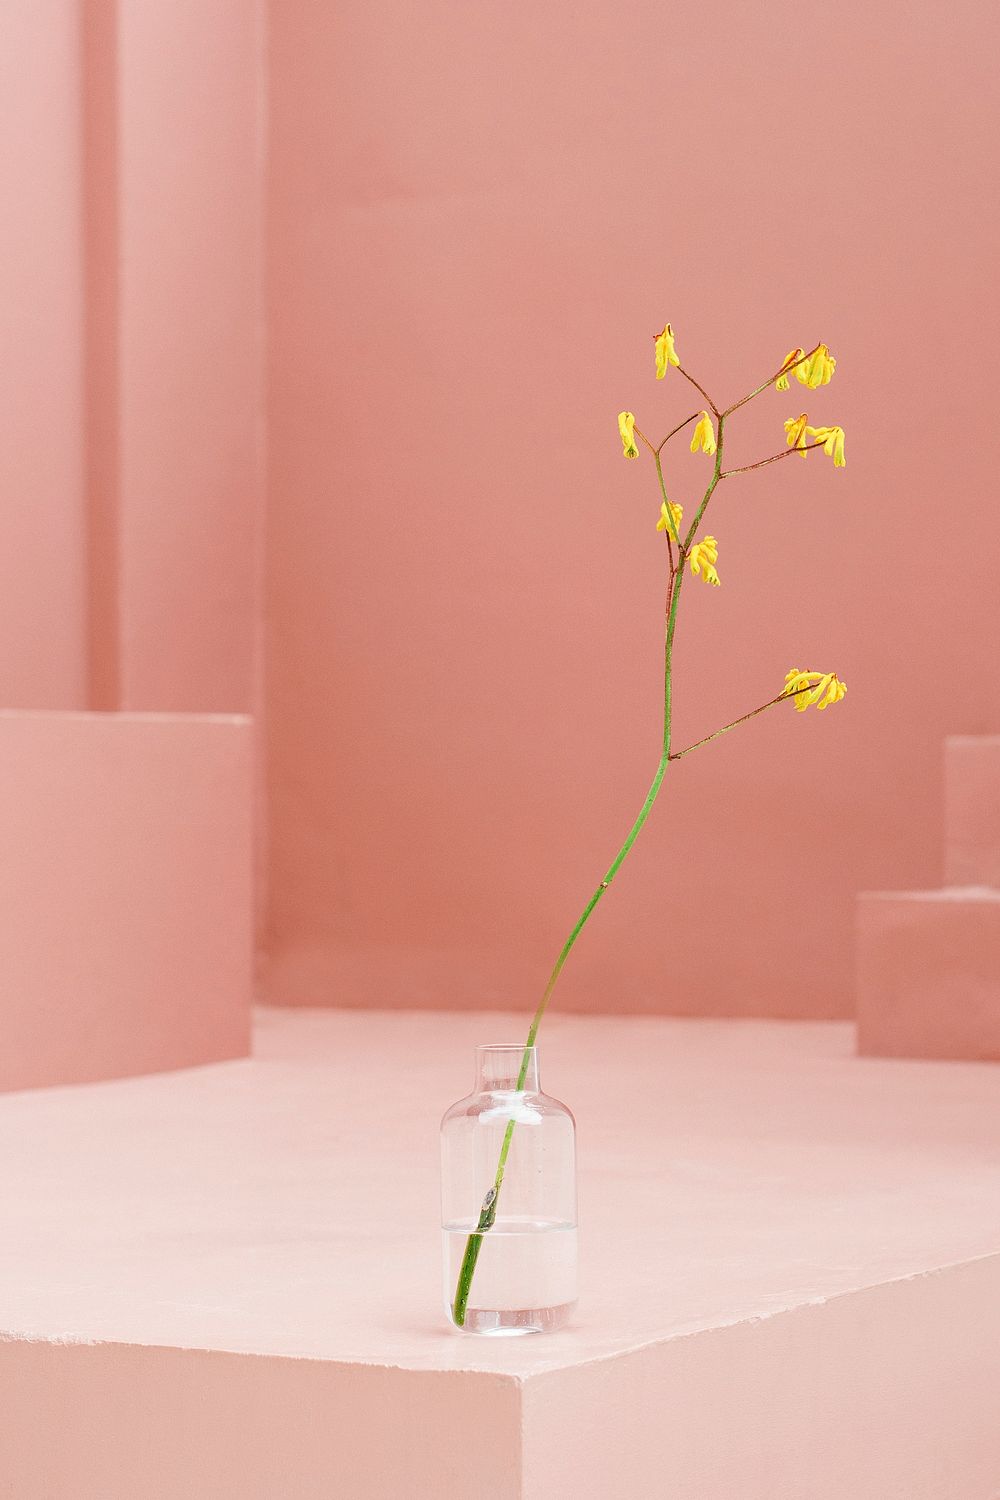 Yellow flower in a glass | Photo - rawpixel